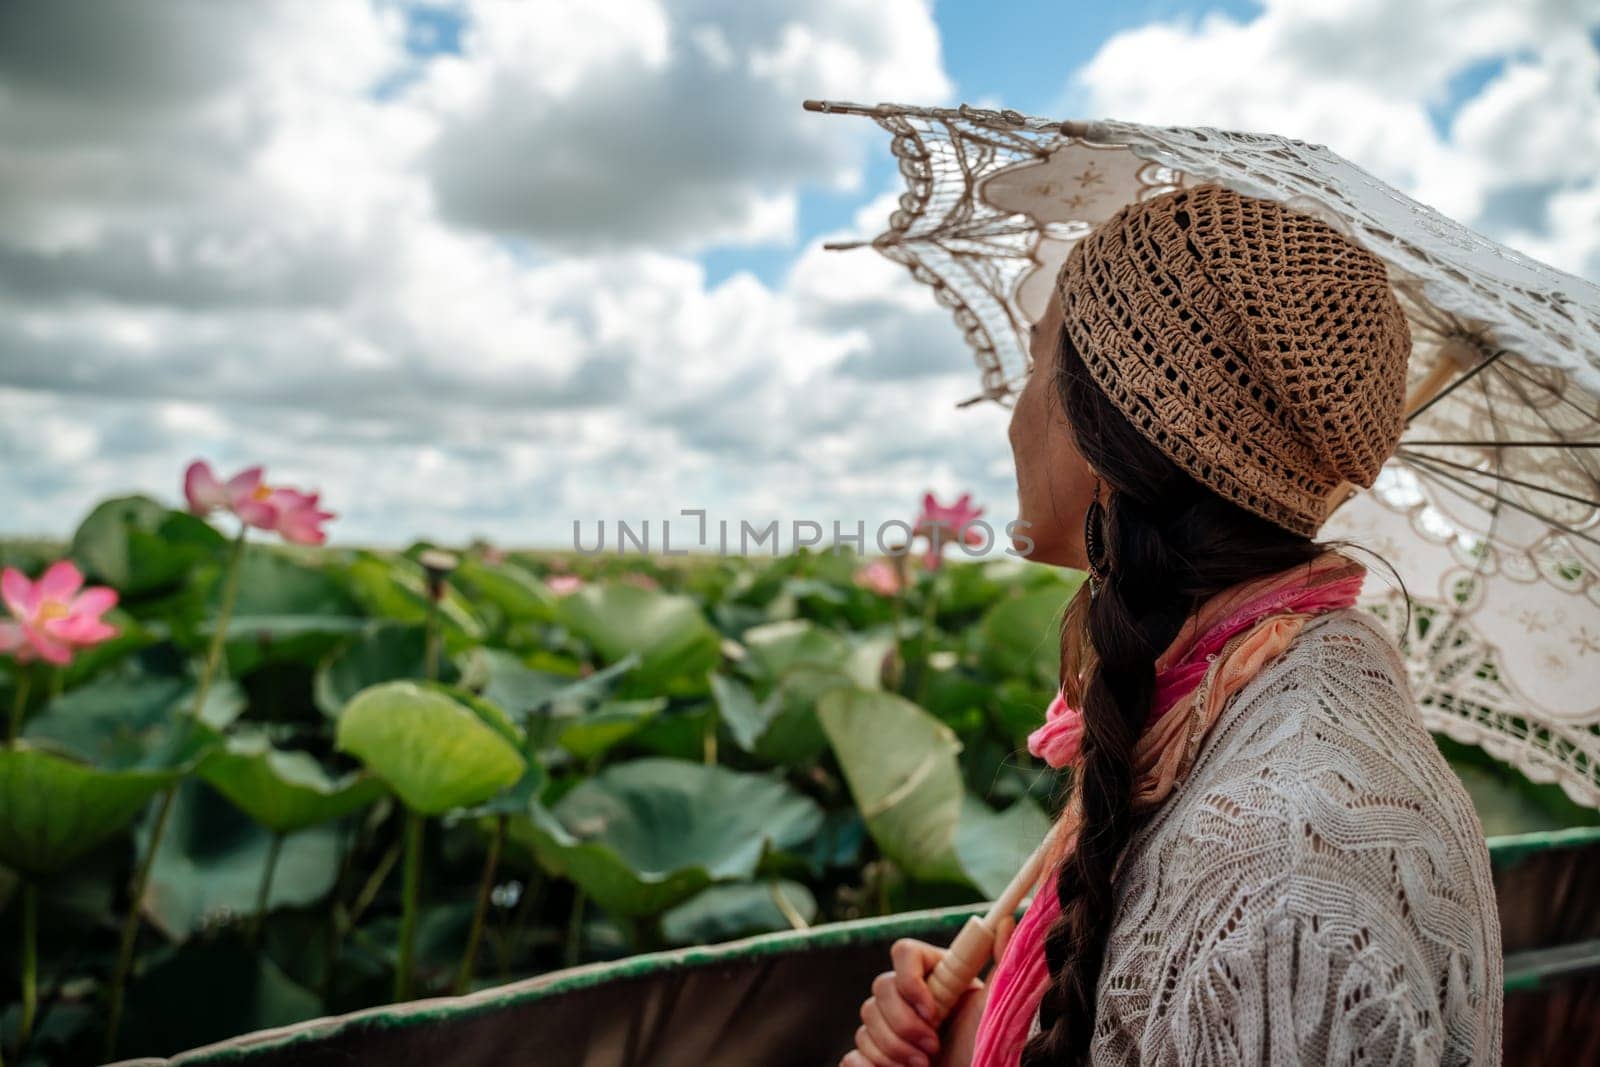 A woman wearing a hat and holding an umbrella is looking at a field of pink flowers. The scene is peaceful and serene, with the woman taking in the beauty of the flowers. by Matiunina